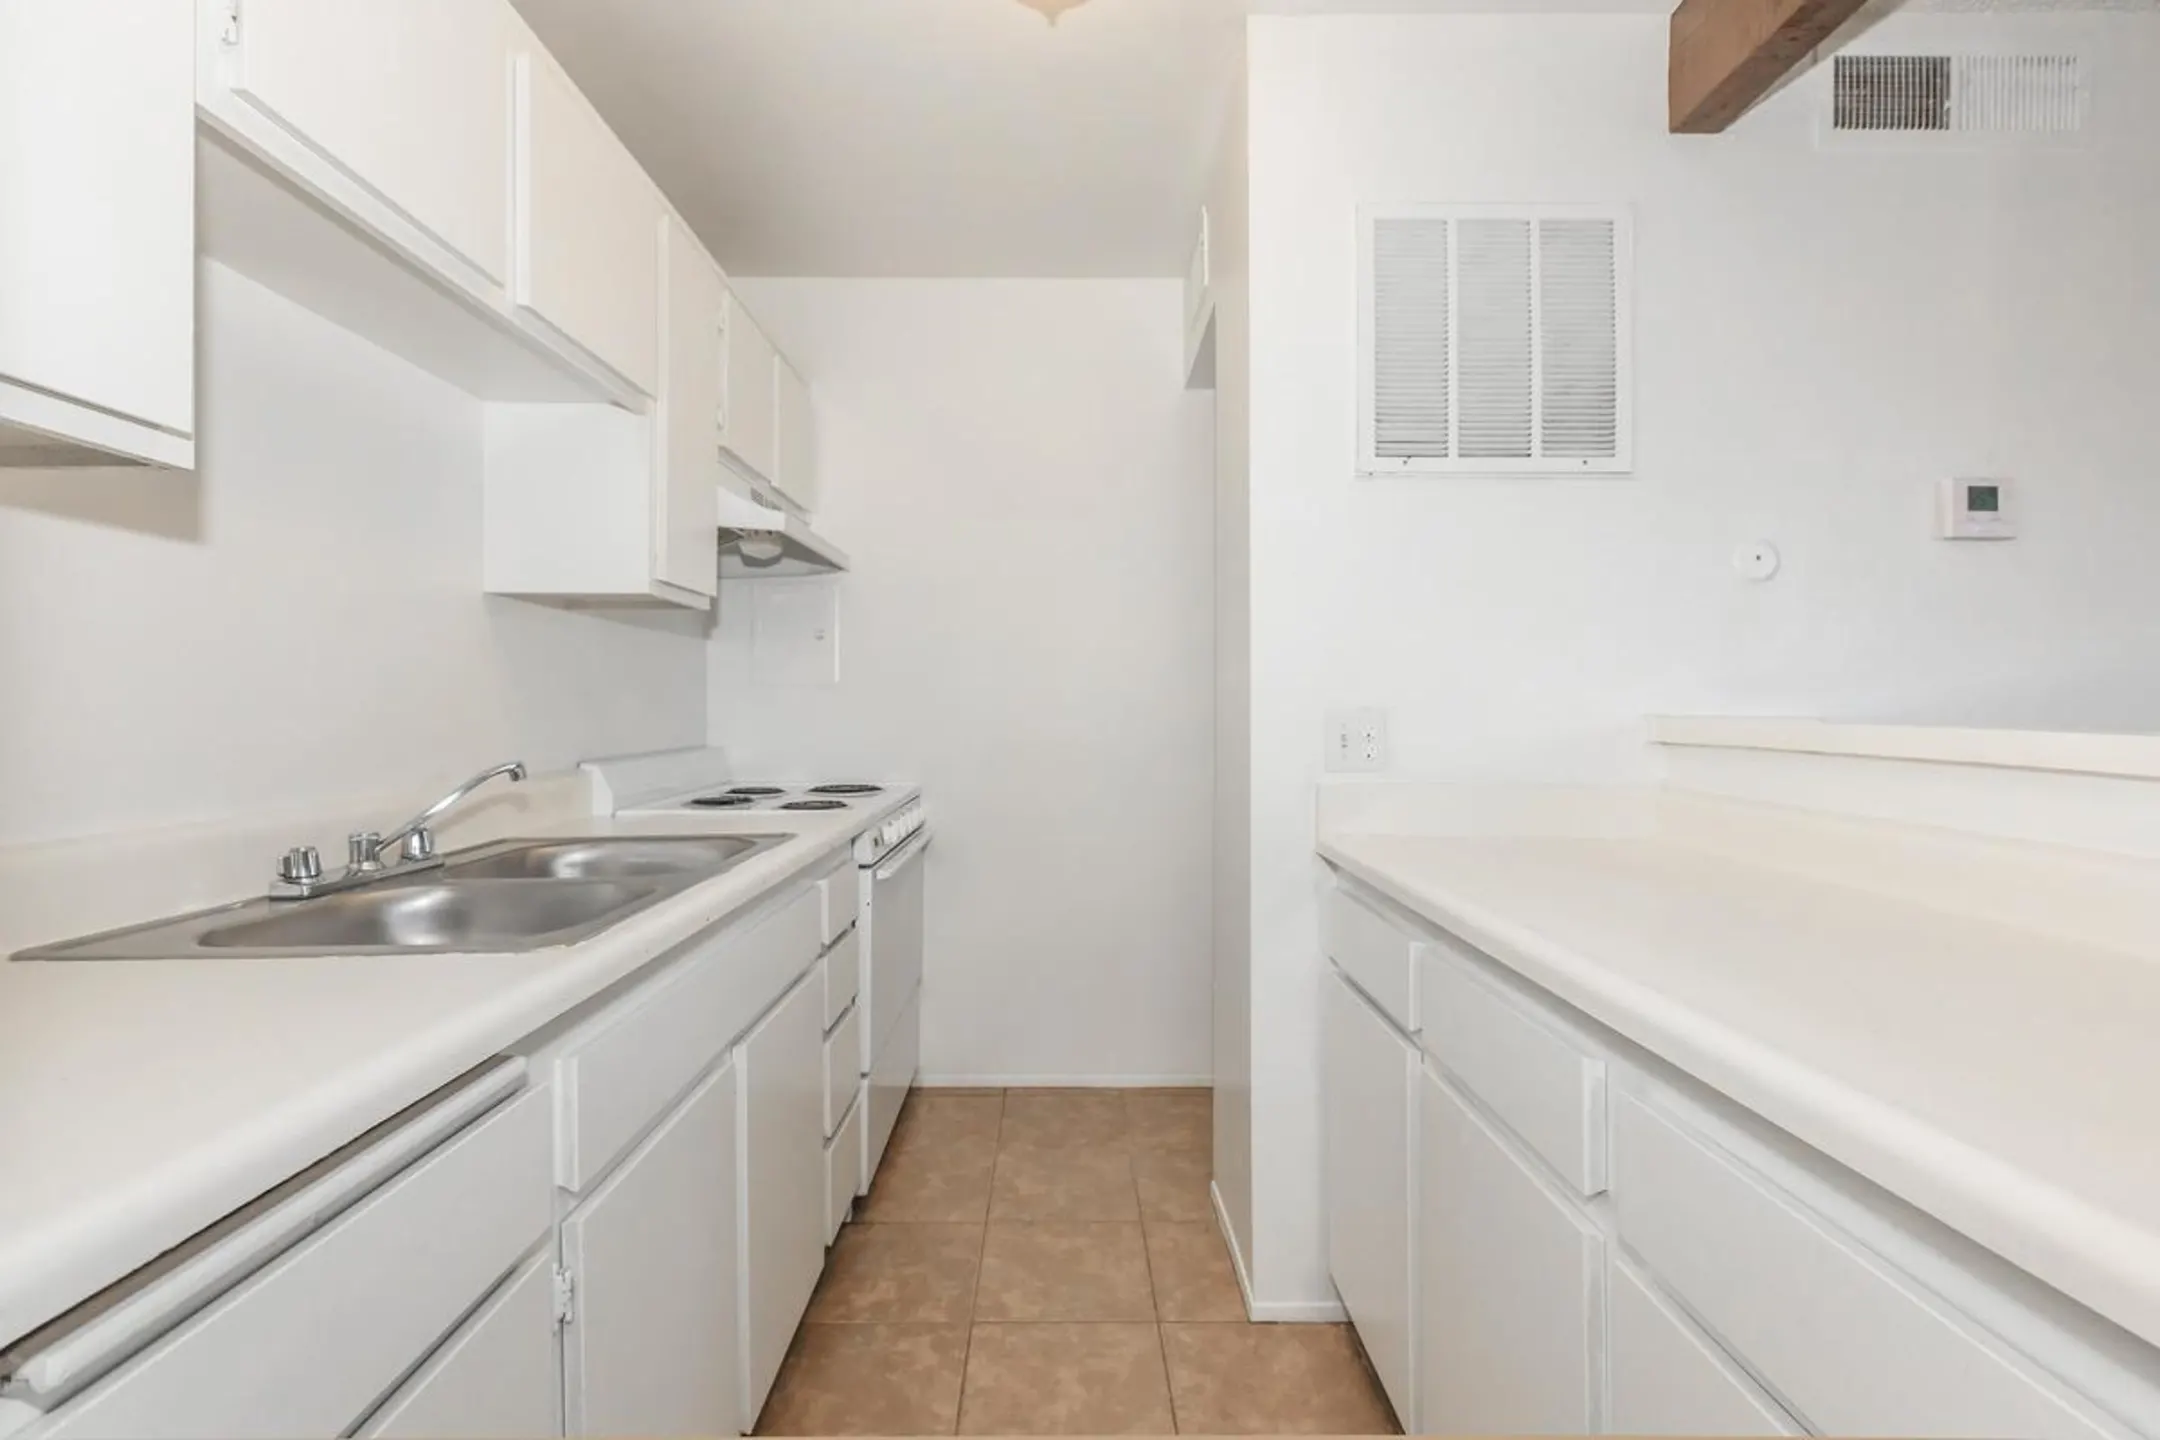 Kitchen - Pacific Terrace Apartments - Bakersfield, CA